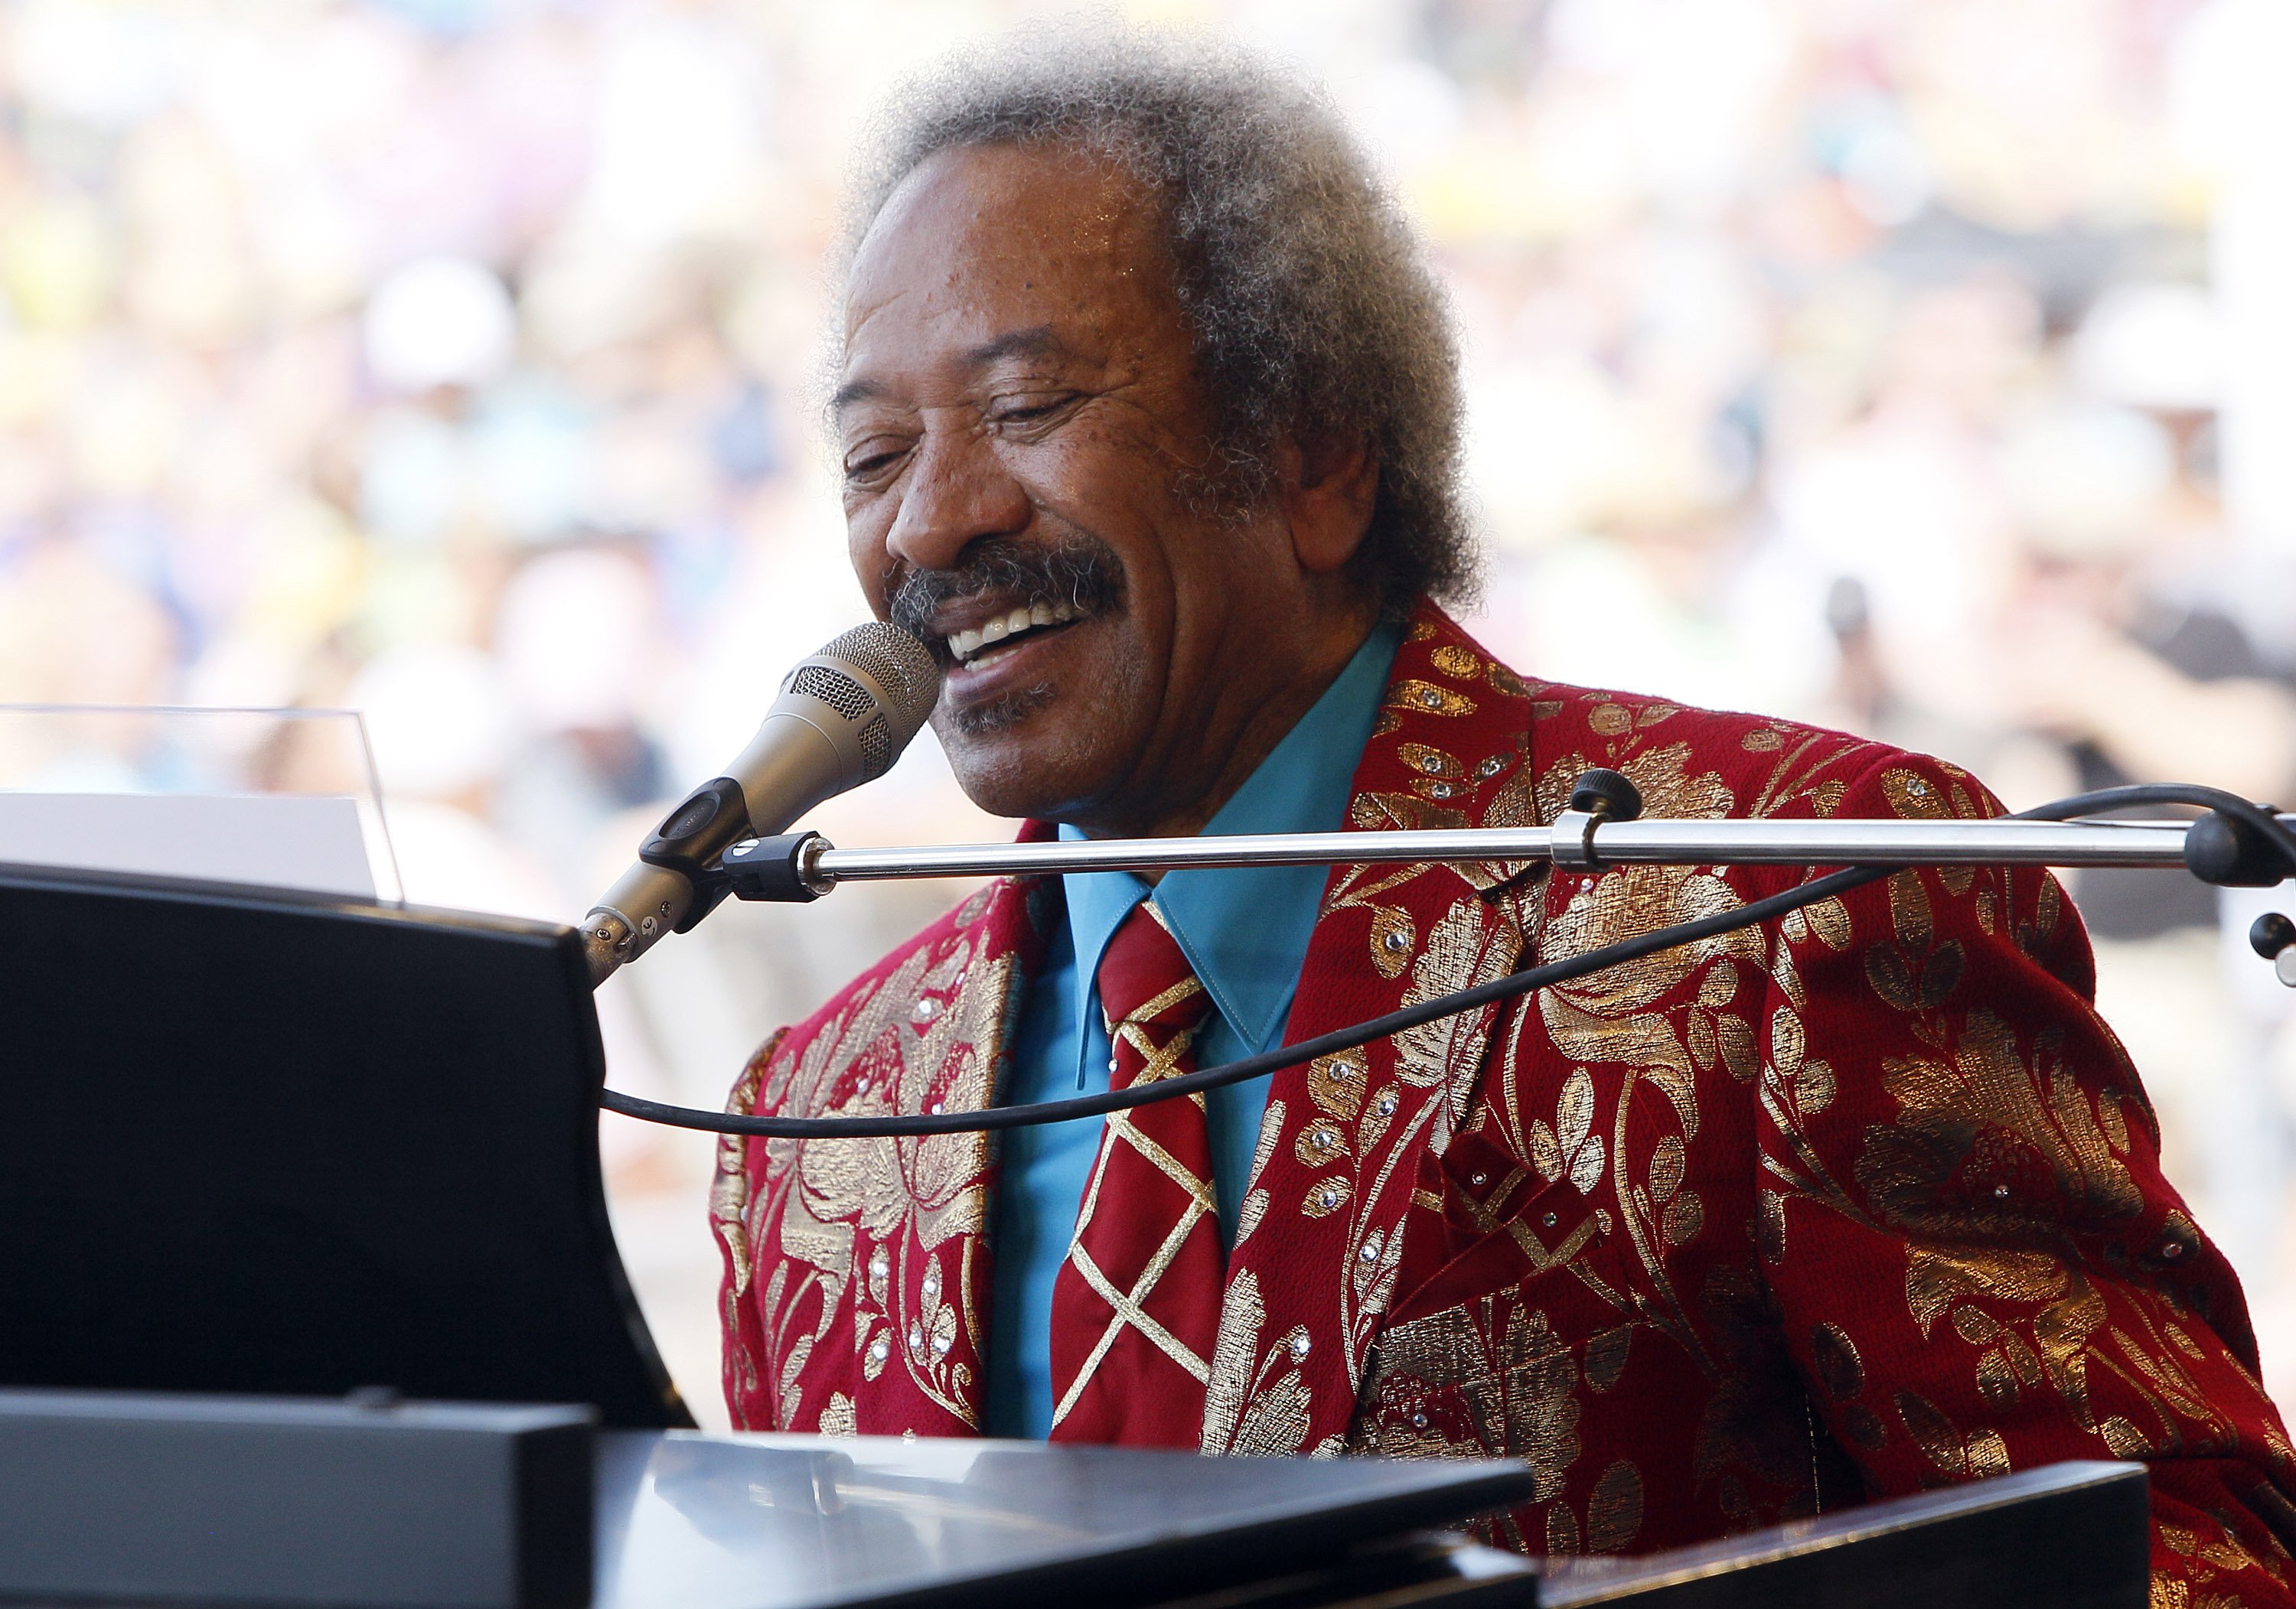 Toussaint performs at the New Orleans Jazz and Heritage Festival in New Orleans on May 7, 2011. (Patrick Semansky—AP)